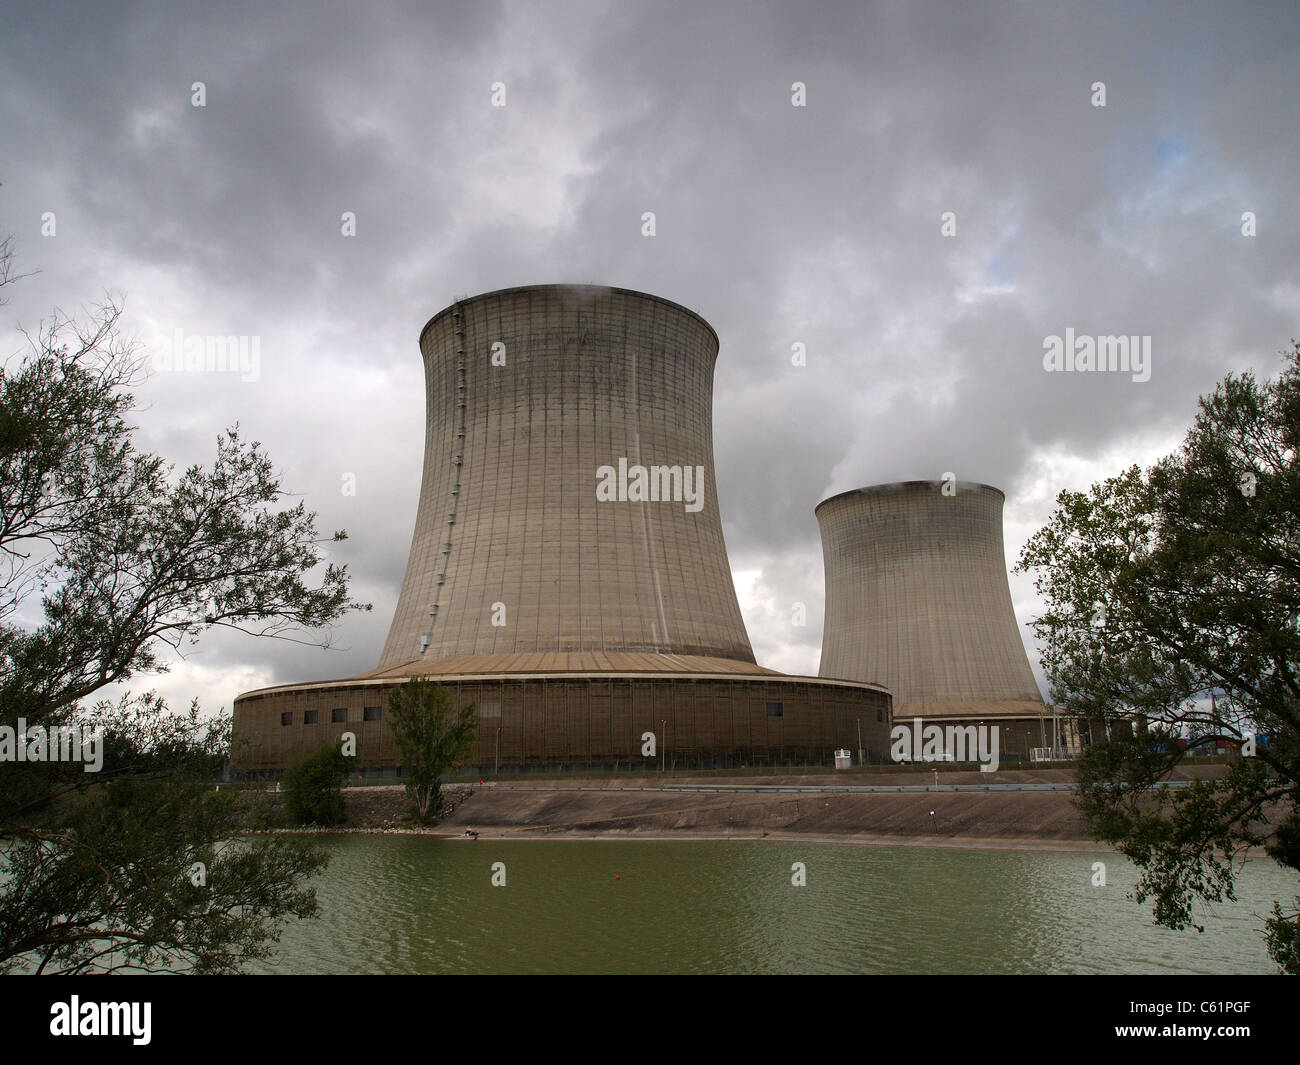 Along the Loire river there are many nuclear power stations. This one is in St. Laurent des Eaux, near Blois. France Stock Photo